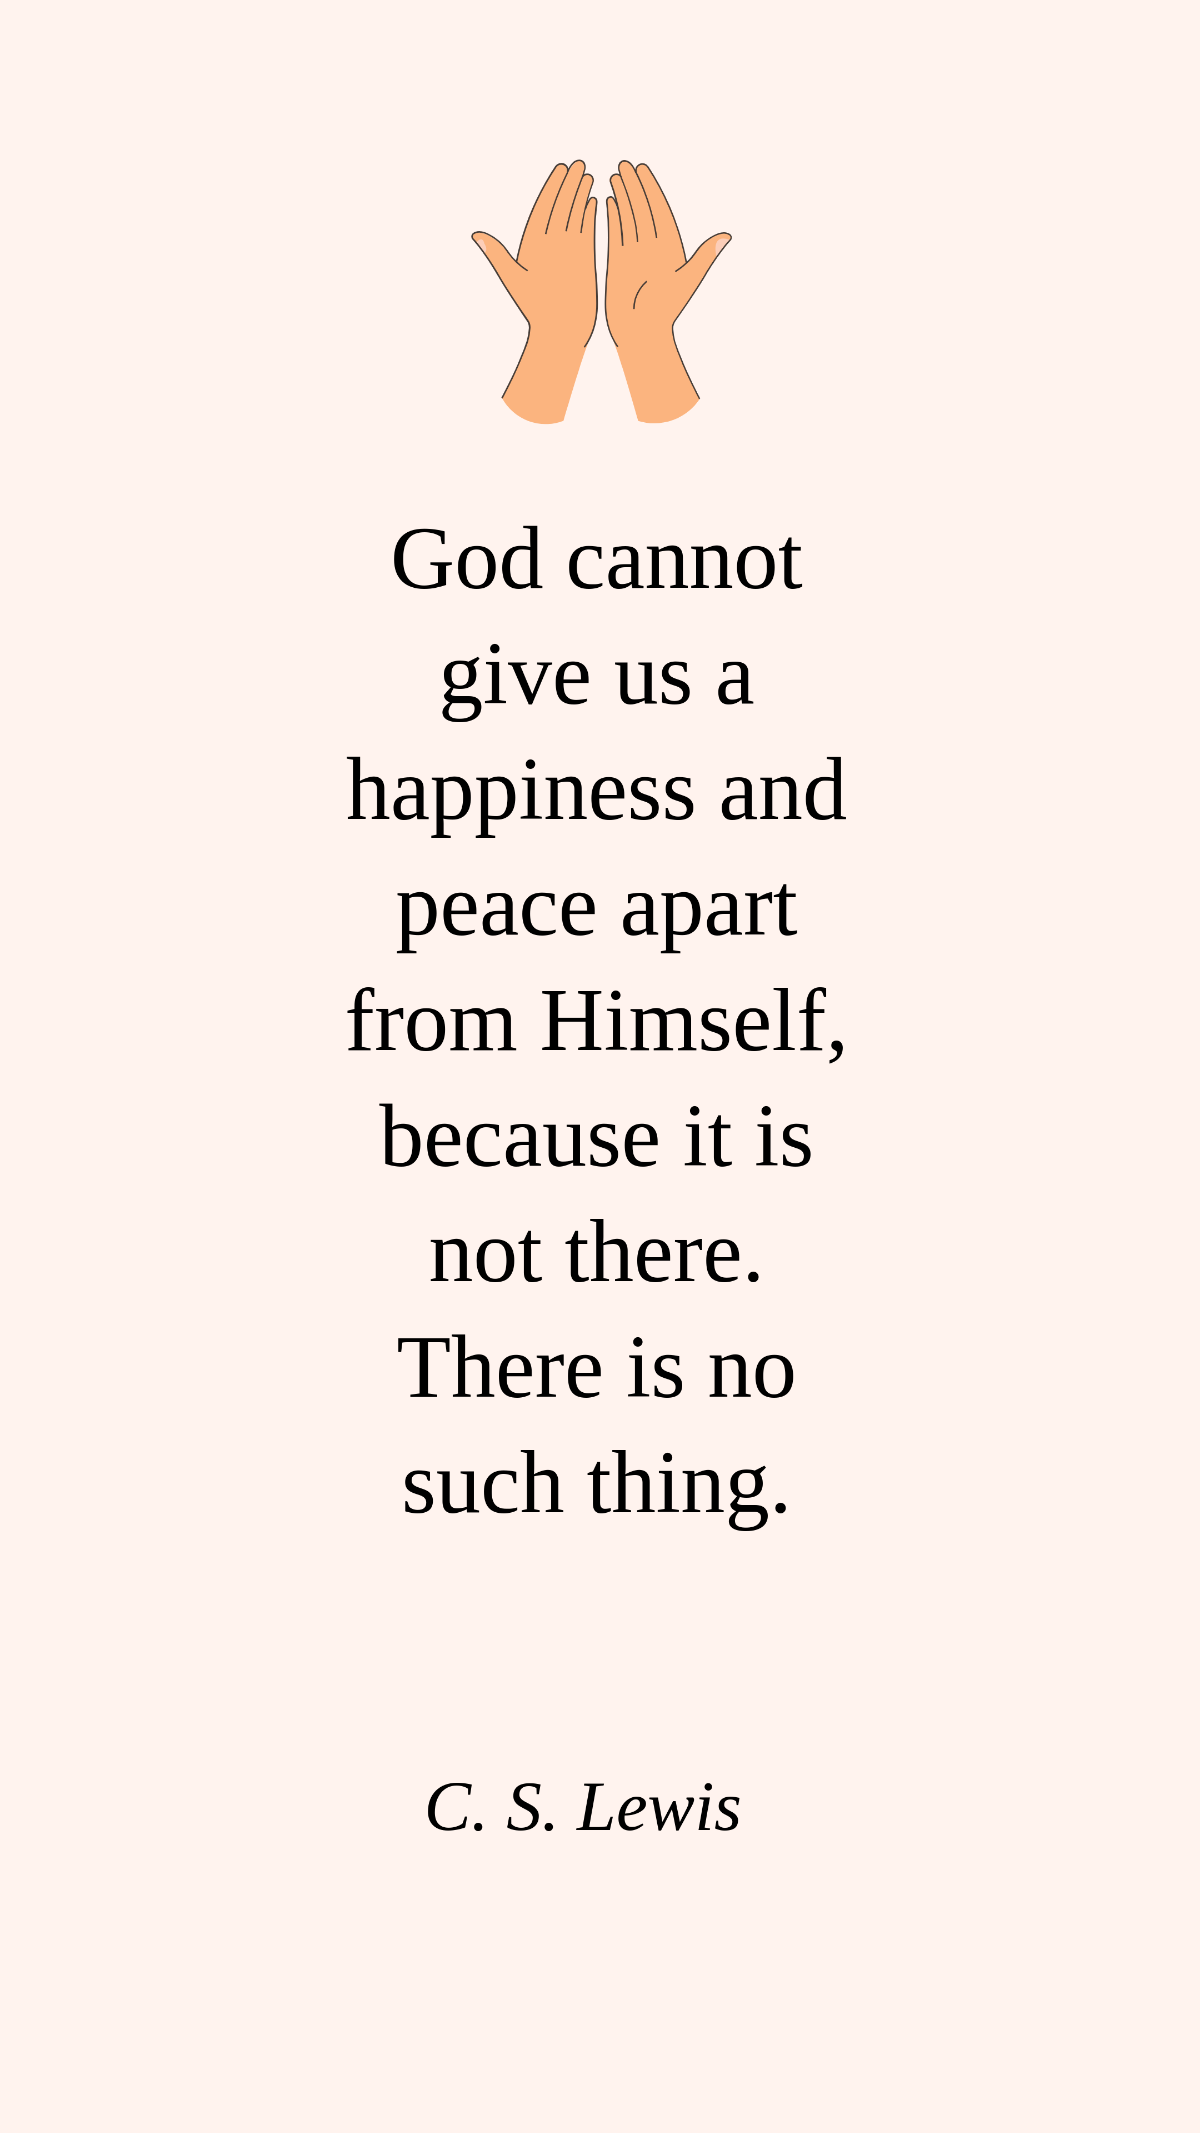 C. S. Lewis - God cannot give us a happiness and peace apart from Himself, because it is not there. There is no such thing. 